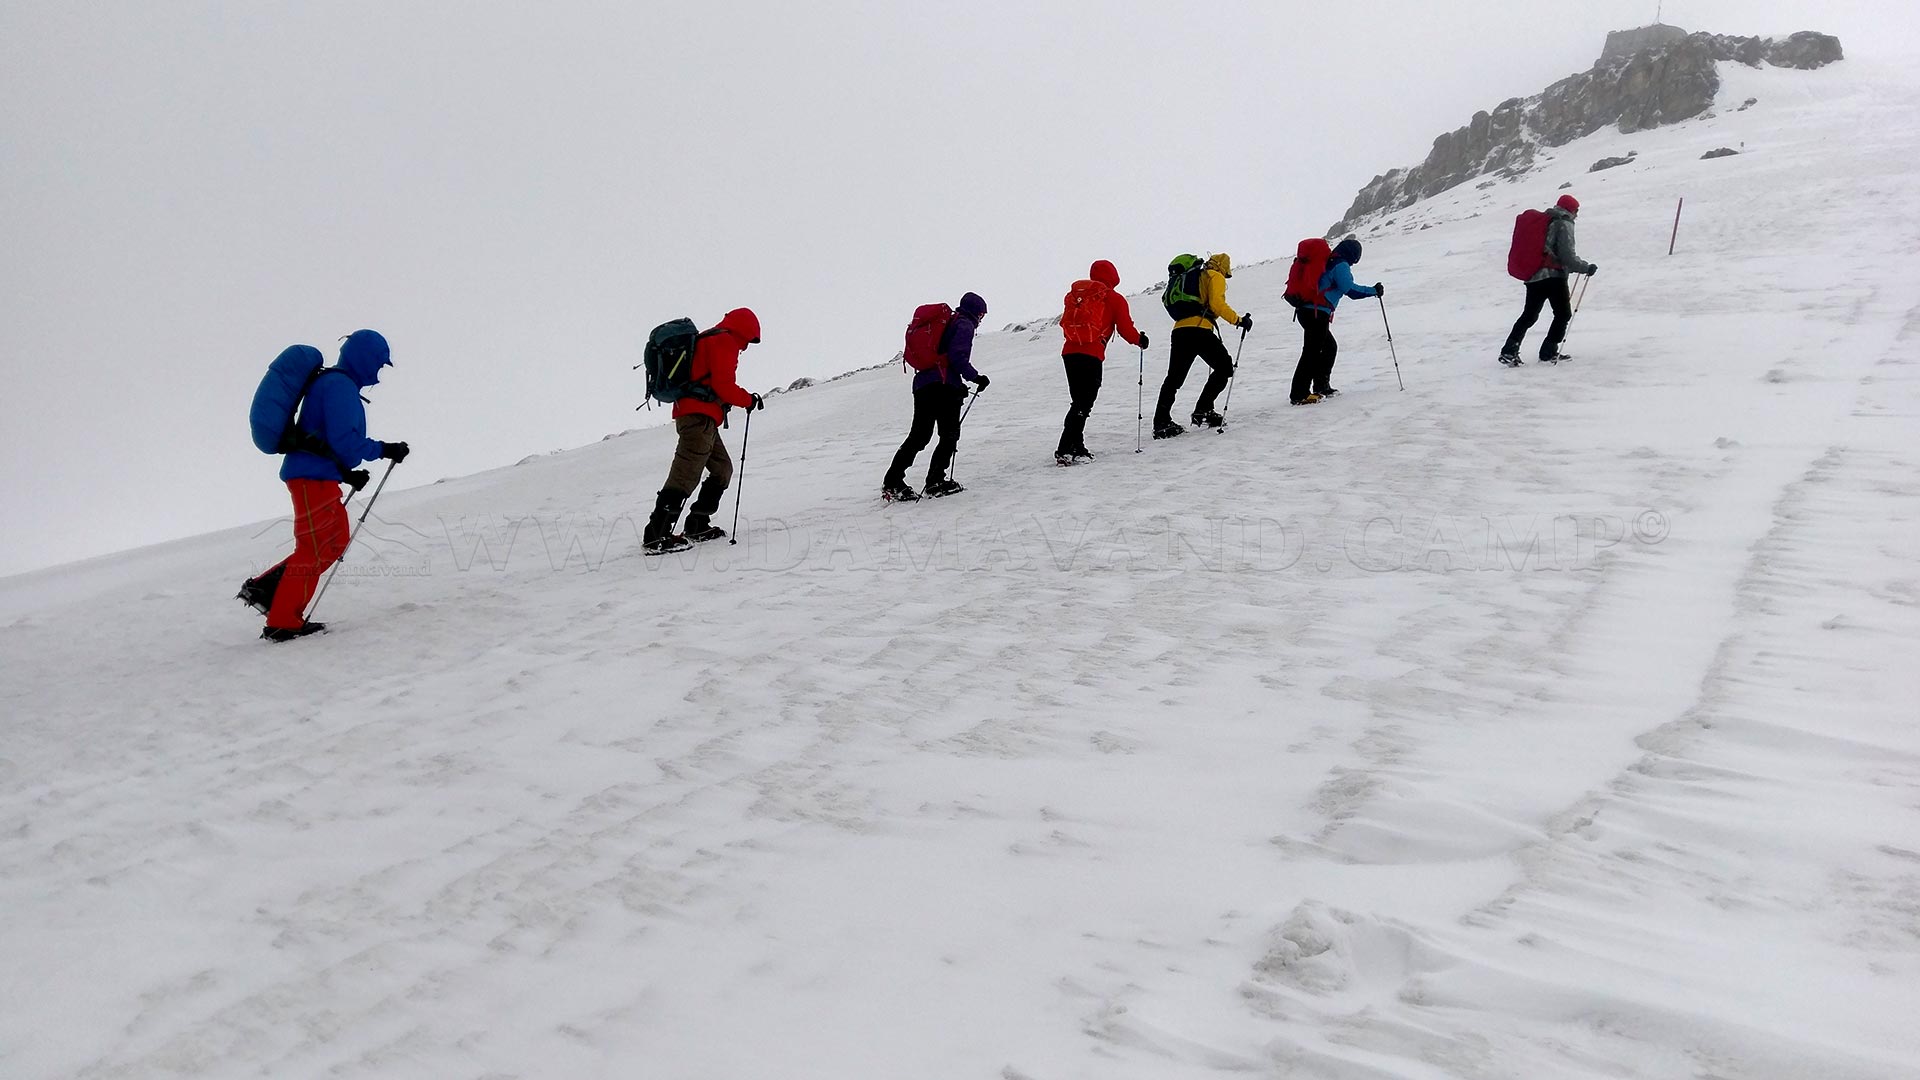 A group of mountaineers, led by the Mount Damavand Group, is heading toward Tochal Peak